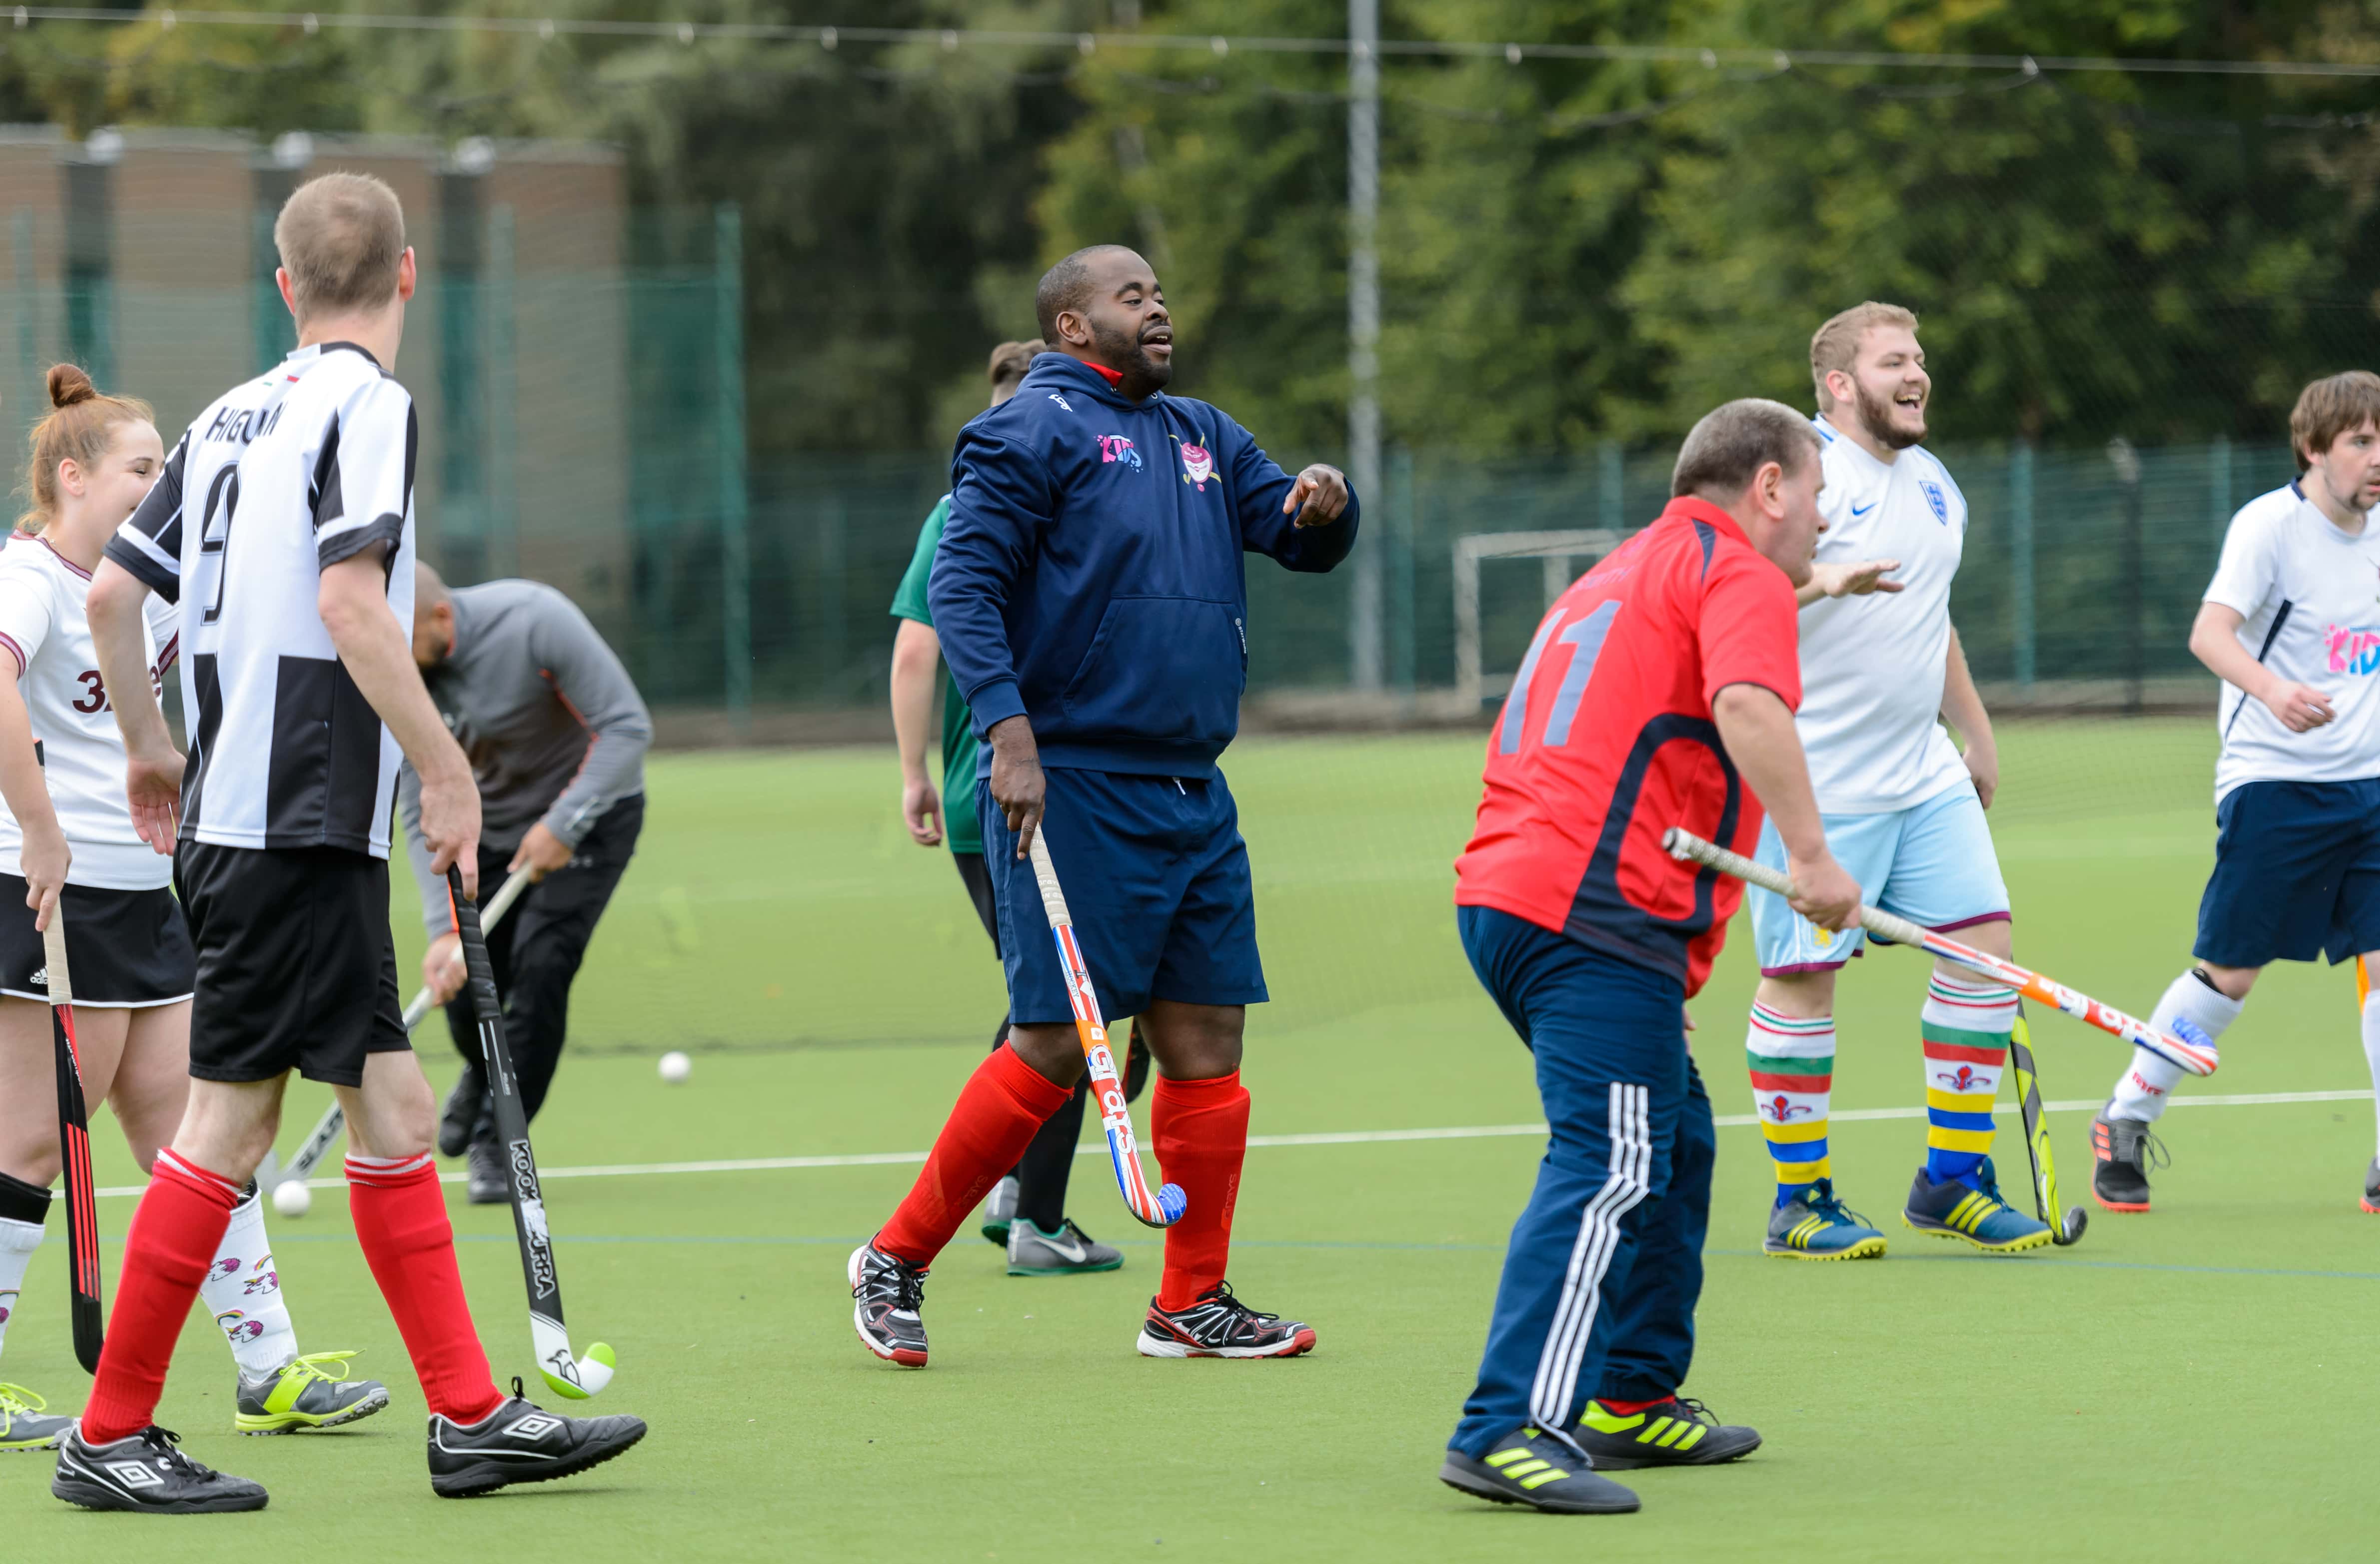 group of  adults on an astro turf taking part in a hockey session